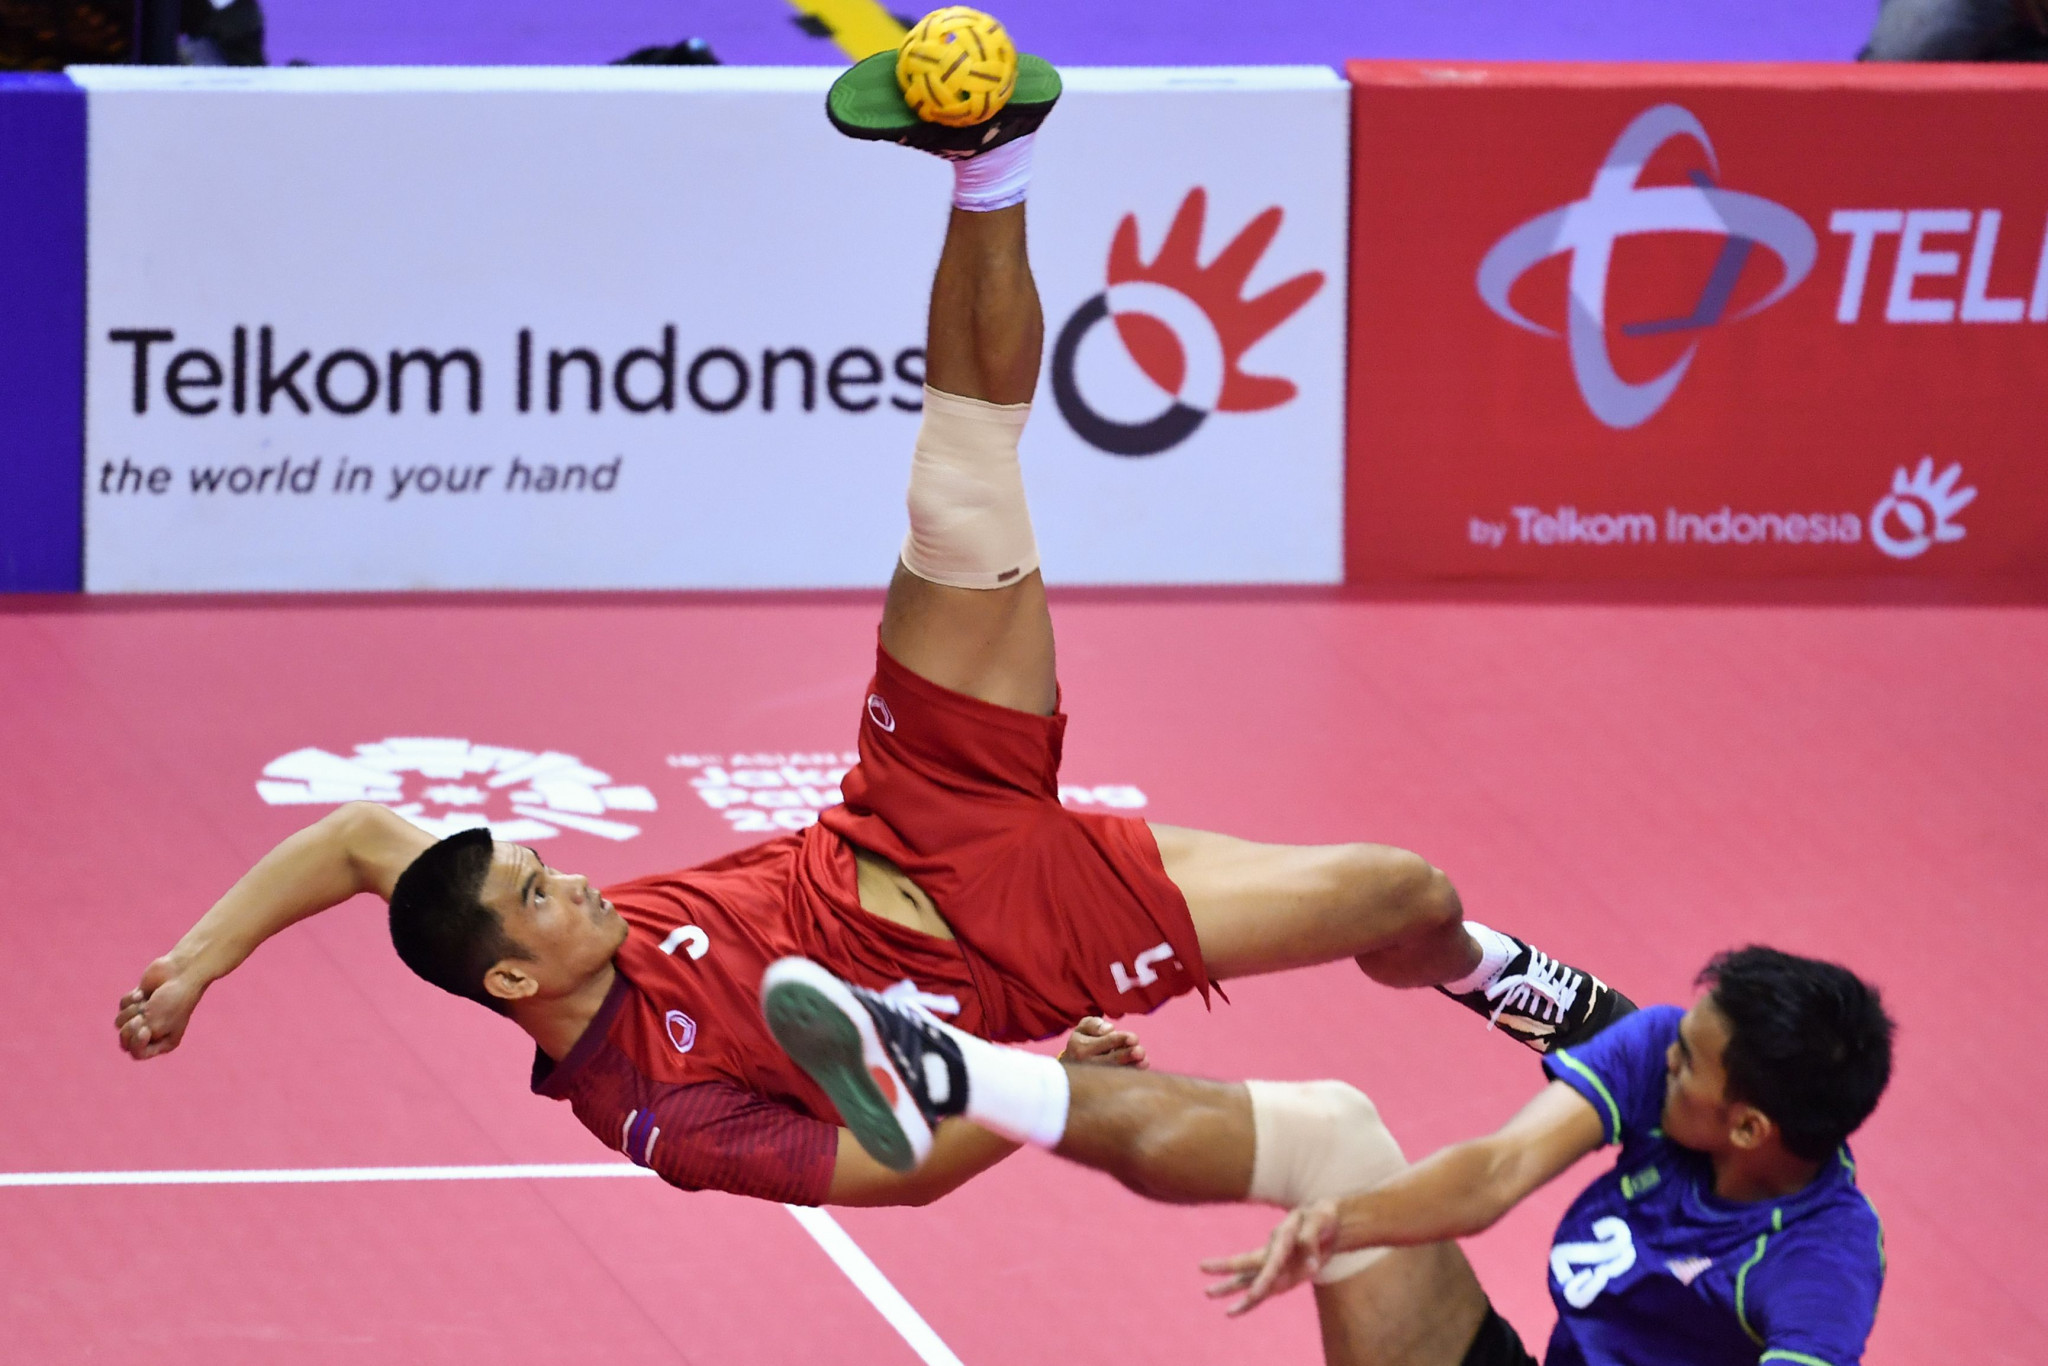 Thailand prevailed in both the men's and women's team regu sepaktakraw competitions ©Getty Images